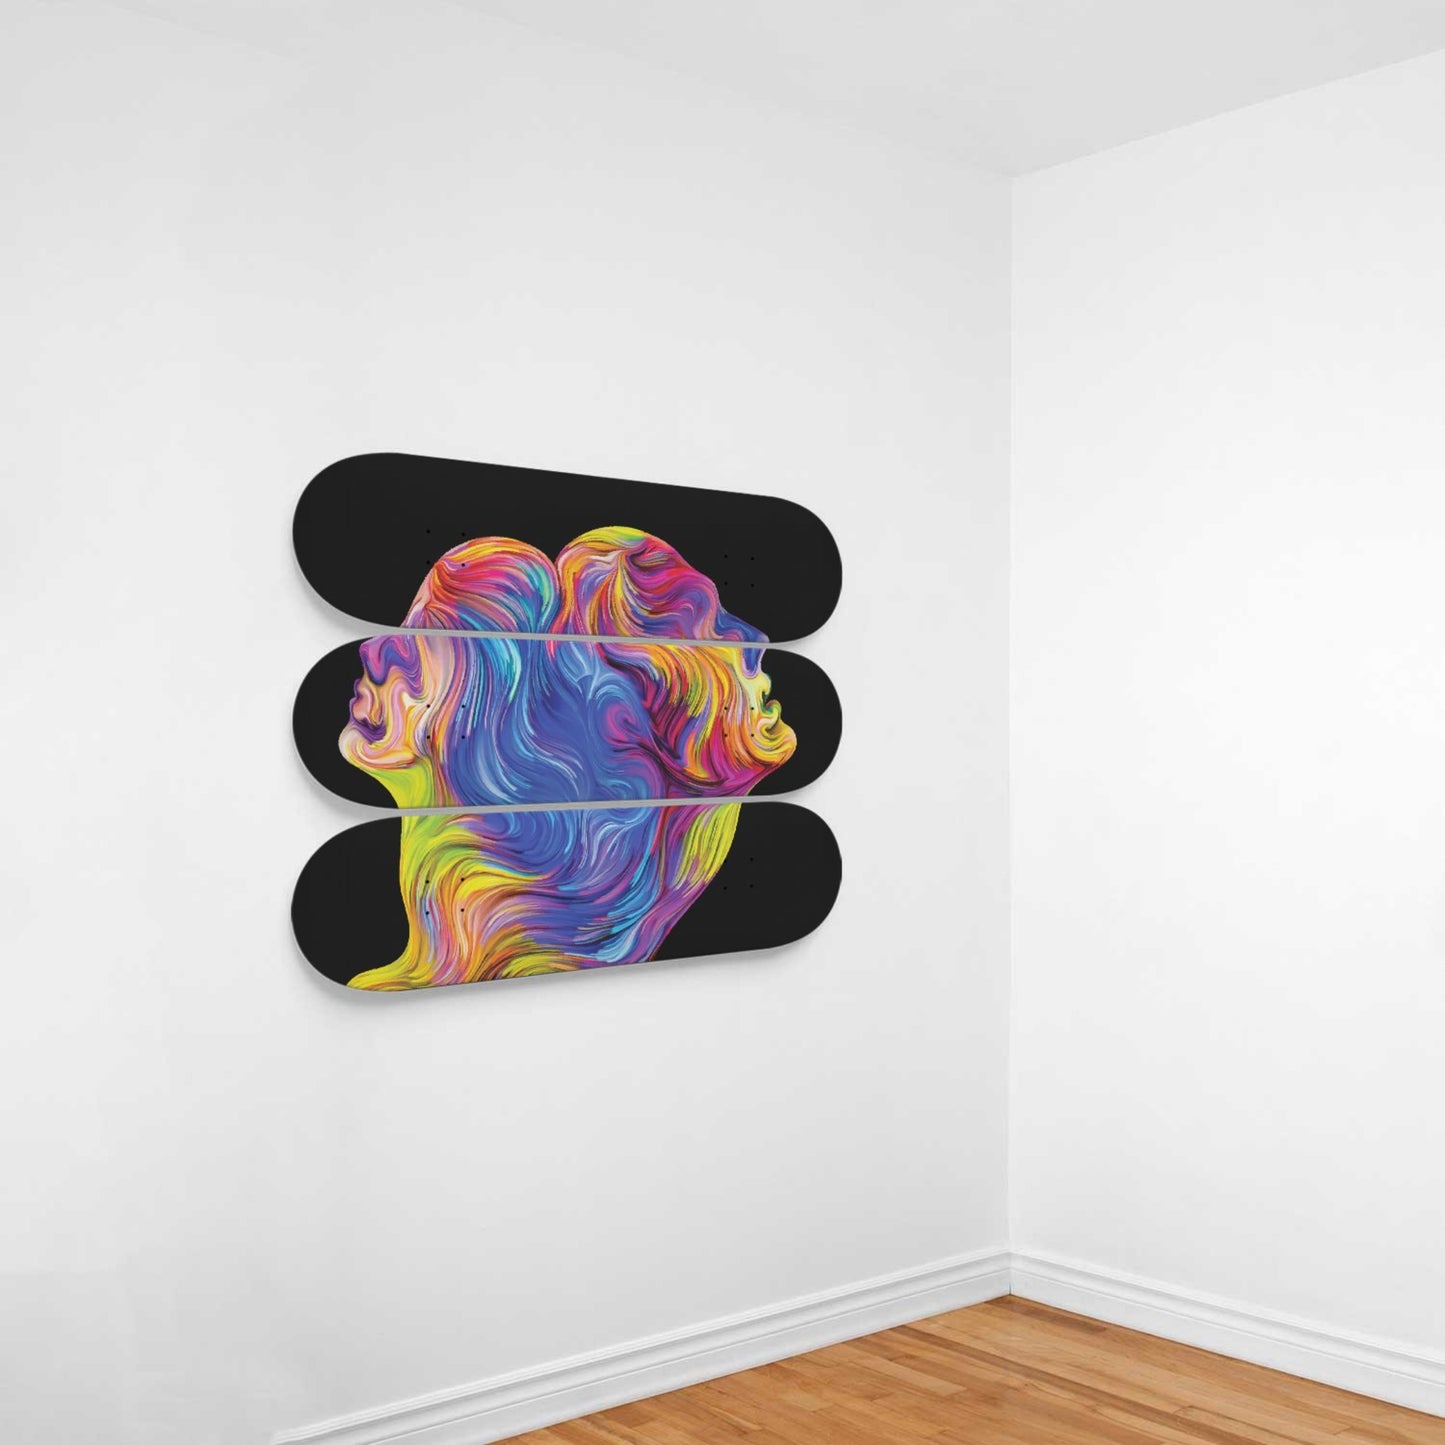 Random Colorful Artwork 15 | Skateboard Deck Wall Art, Wall Hanged Room Decoration, Maple Wood, Accent Gift for Home, Aesthetic Wall Art